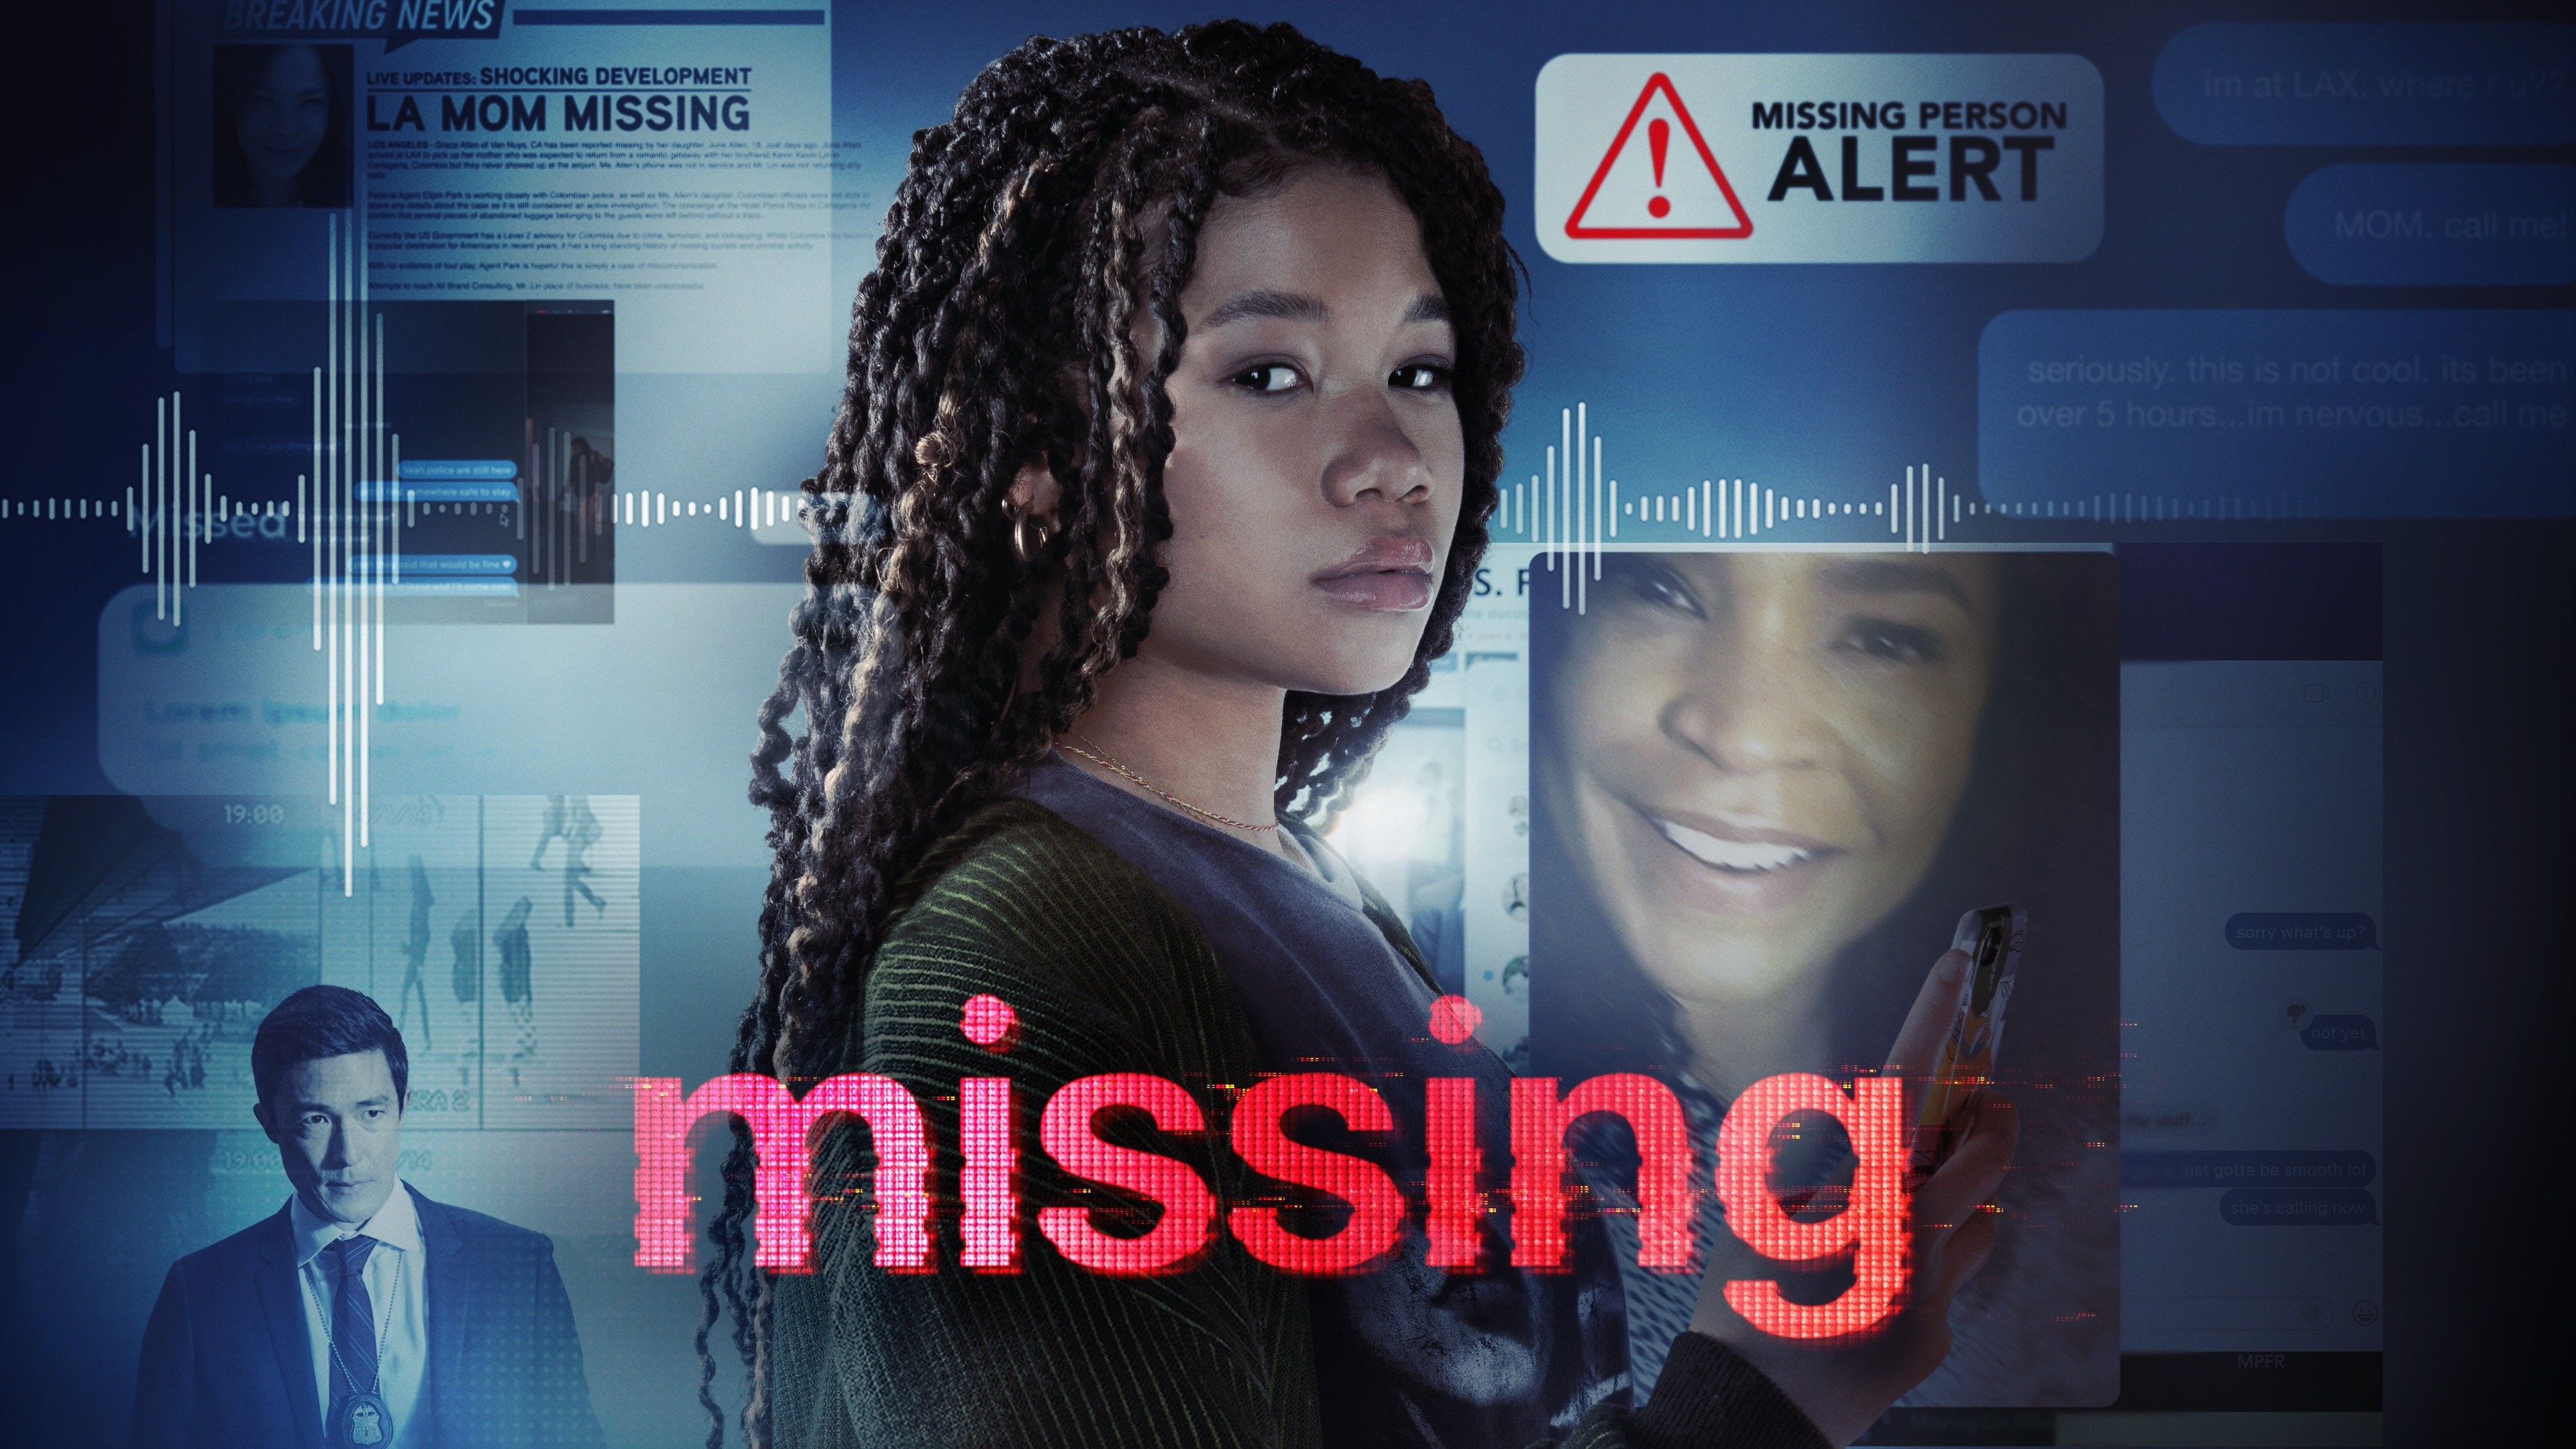 Missing: Dead or Alive? - Rotten Tomatoes